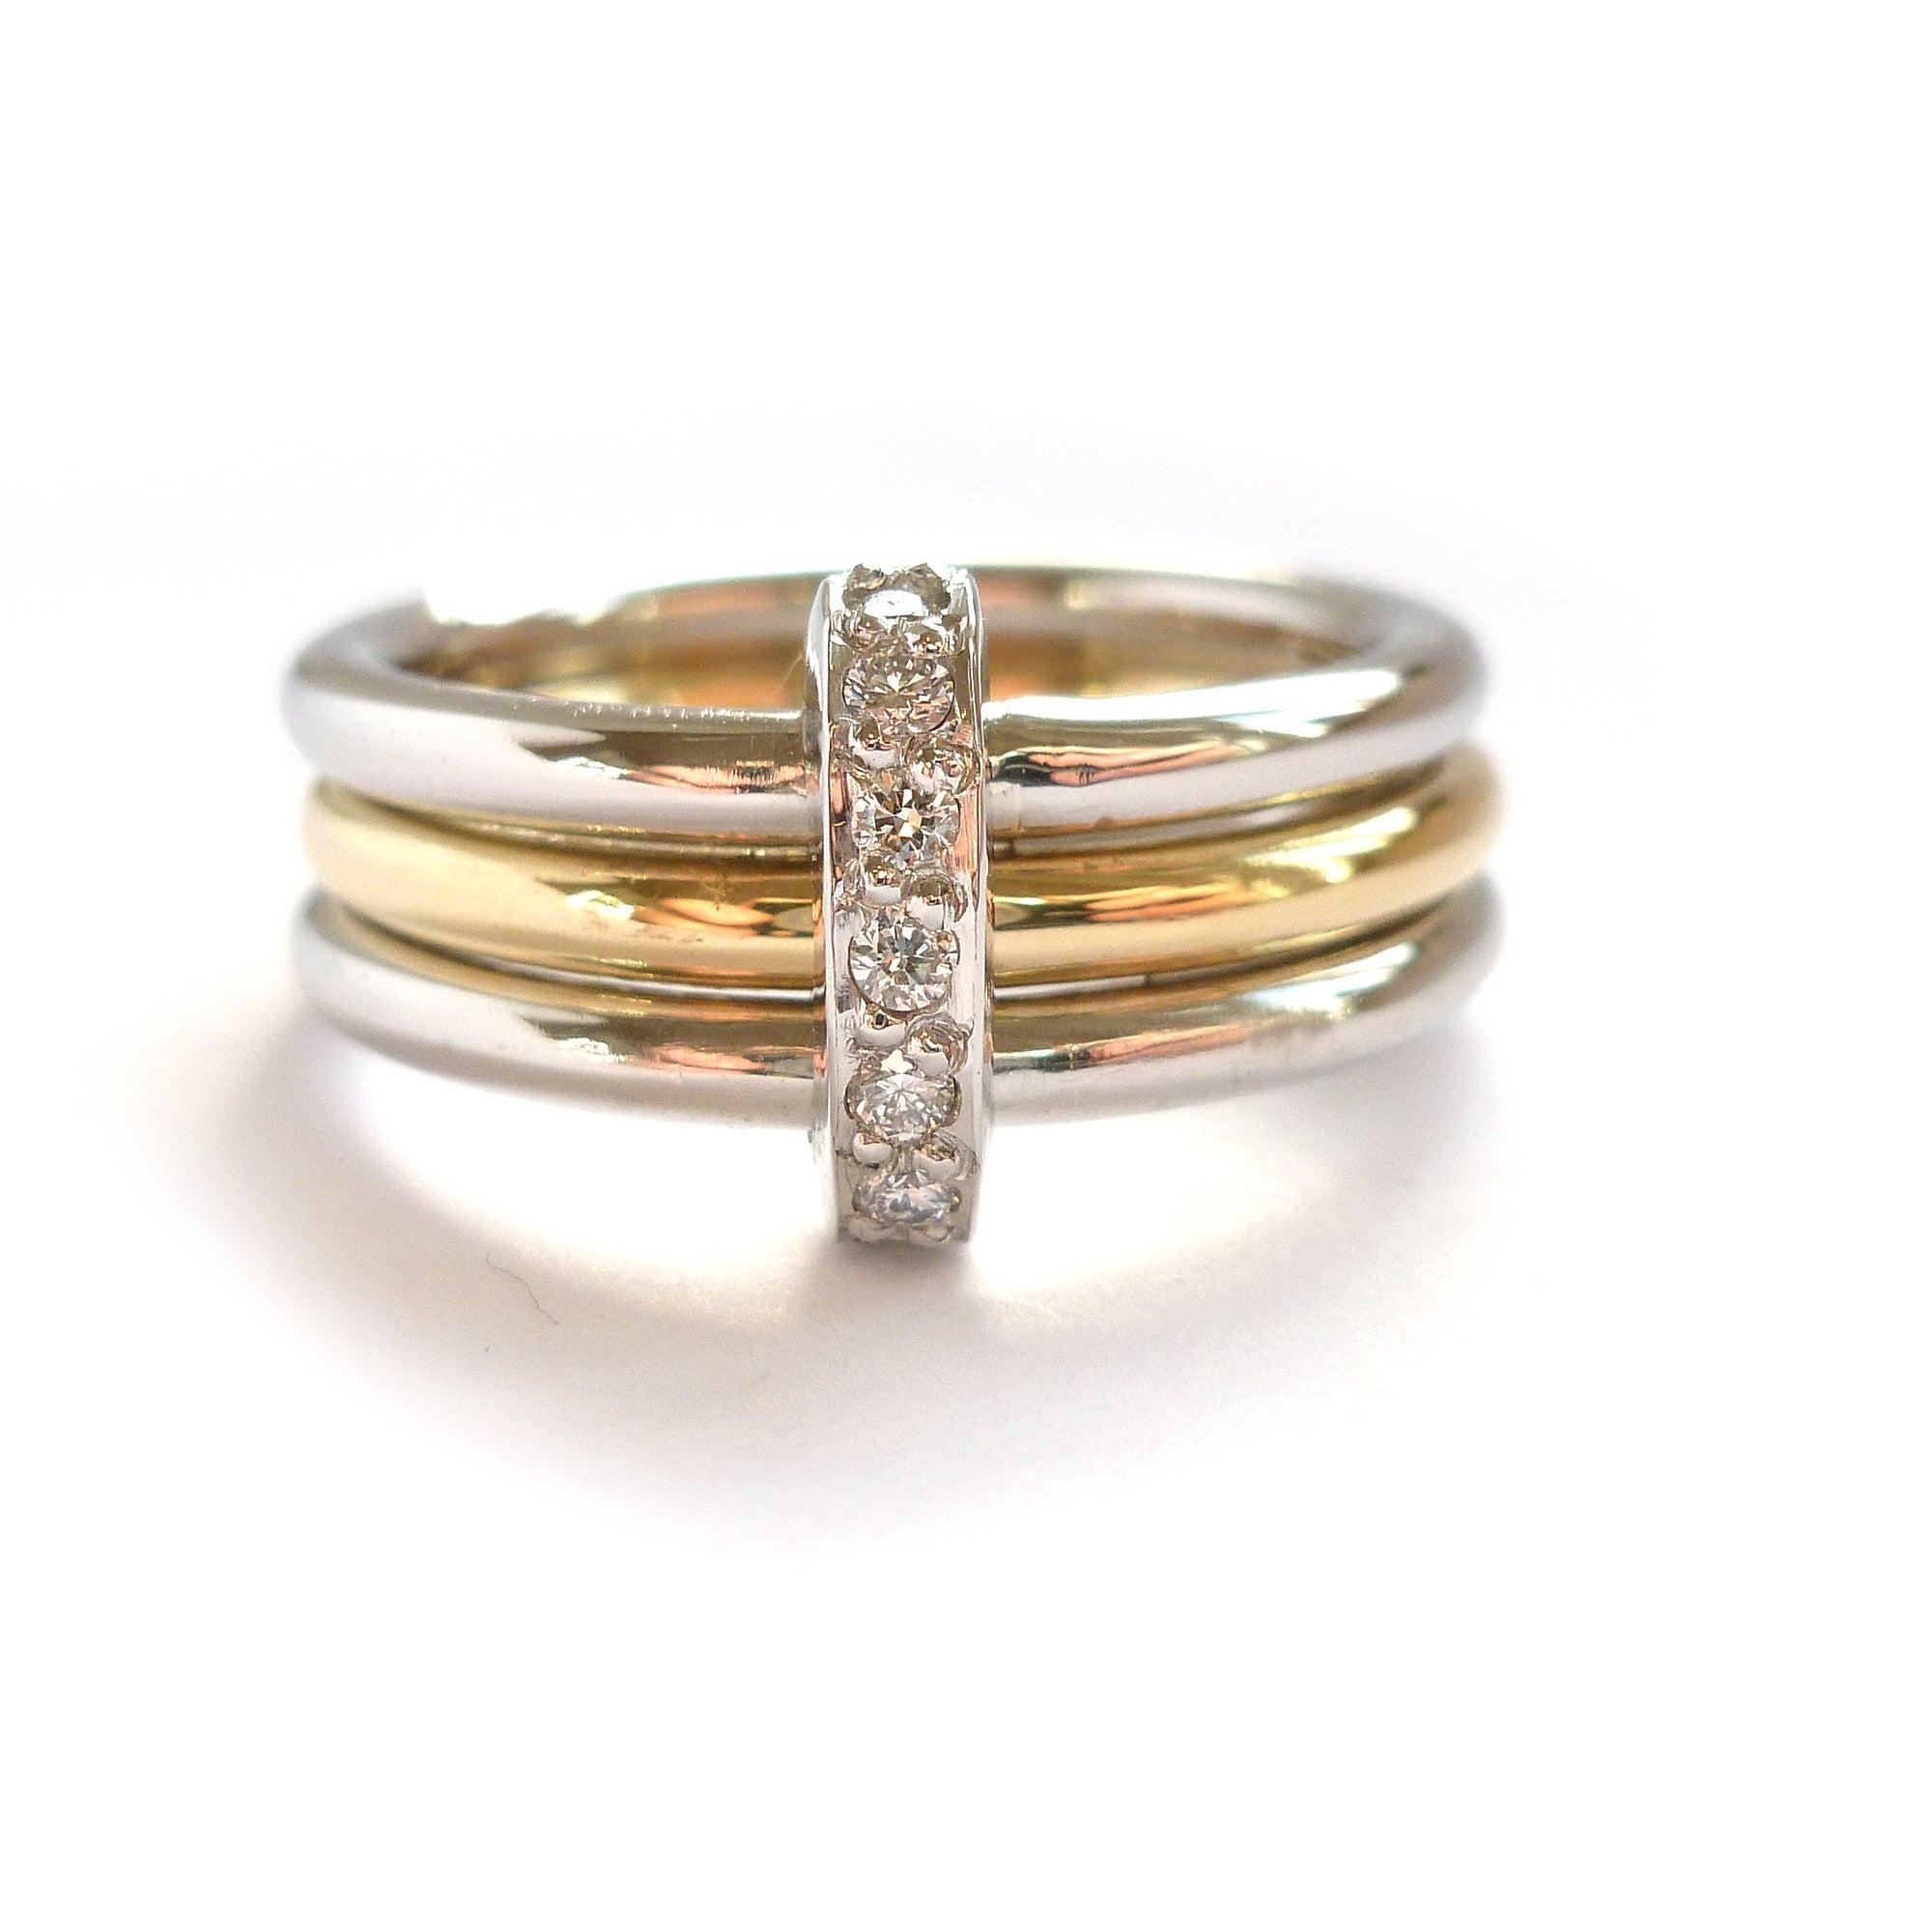 Modern two tone, platinum and yellow gold three band stacking ring with diamonds. Multi band ring or interlocking ring, sometimes called triple band rings too.